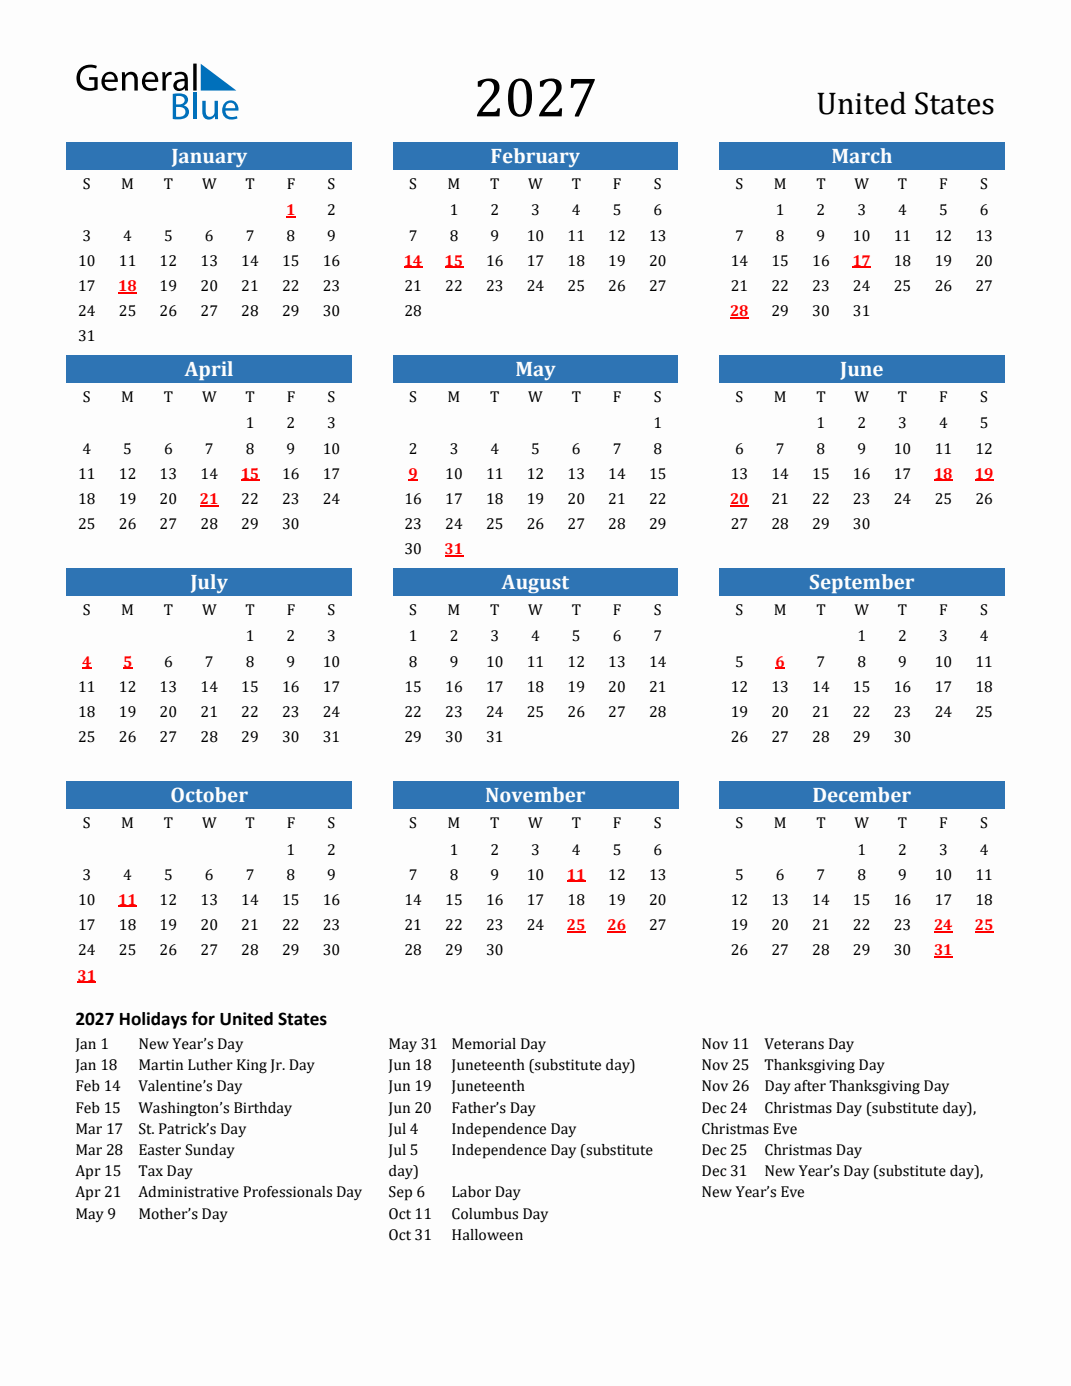 2027 United States Calendar with Holidays